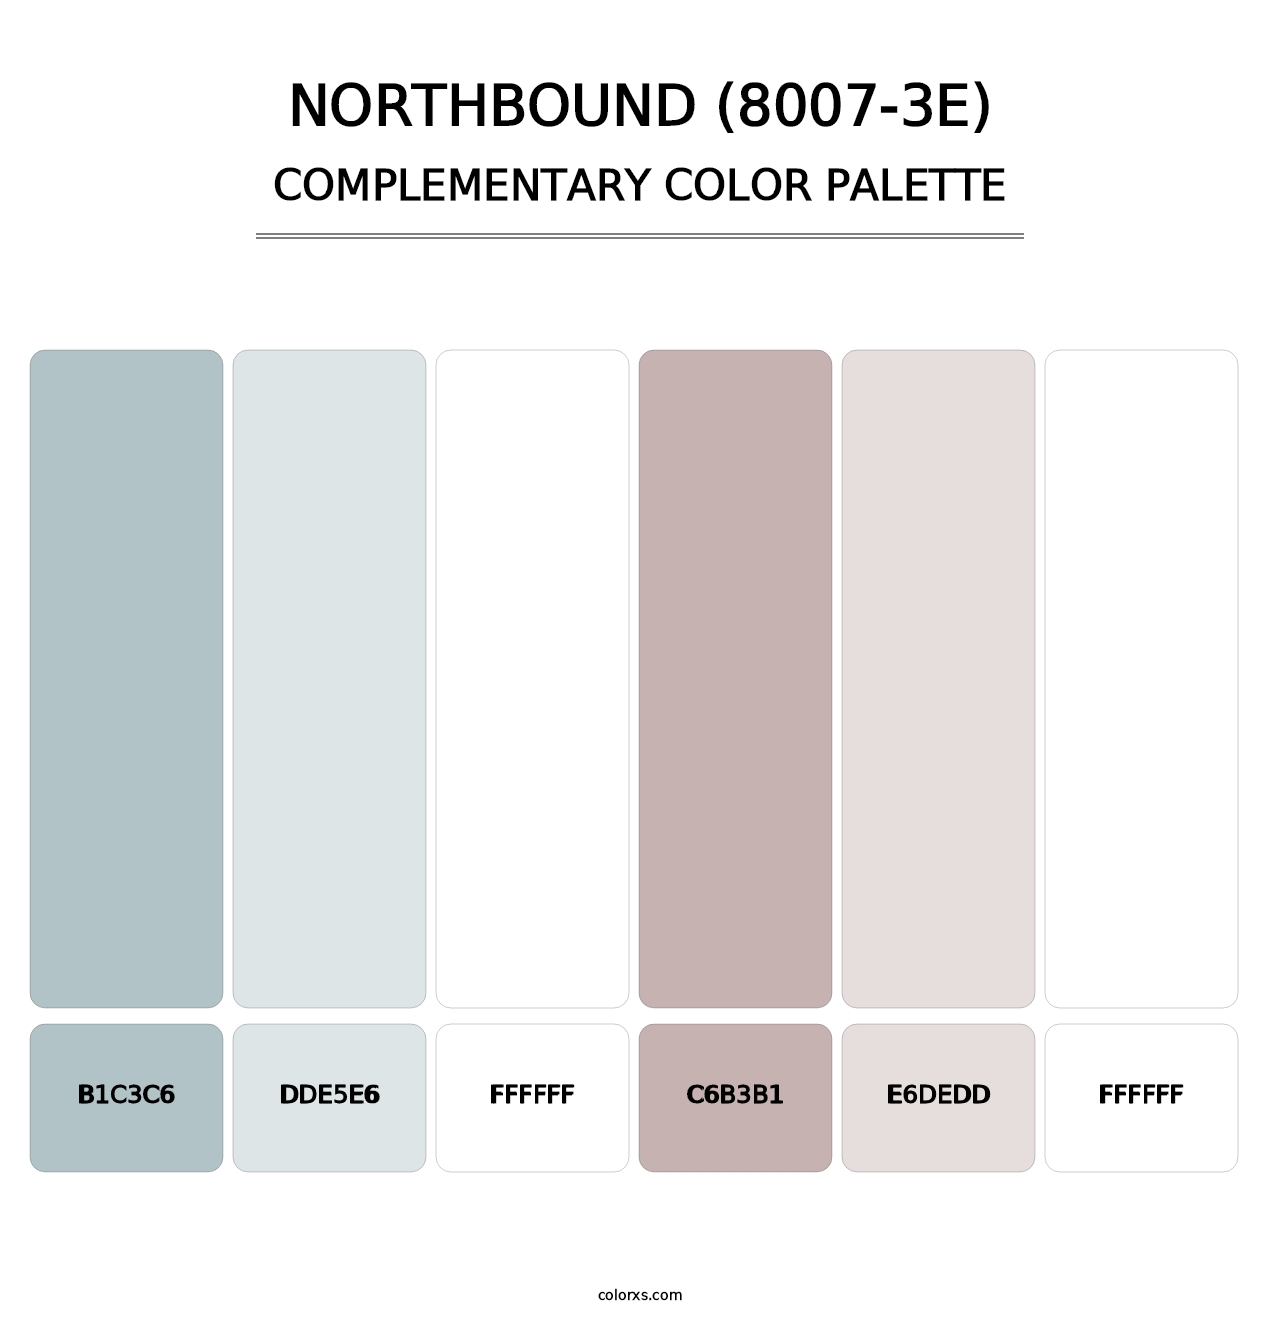 Northbound (8007-3E) - Complementary Color Palette